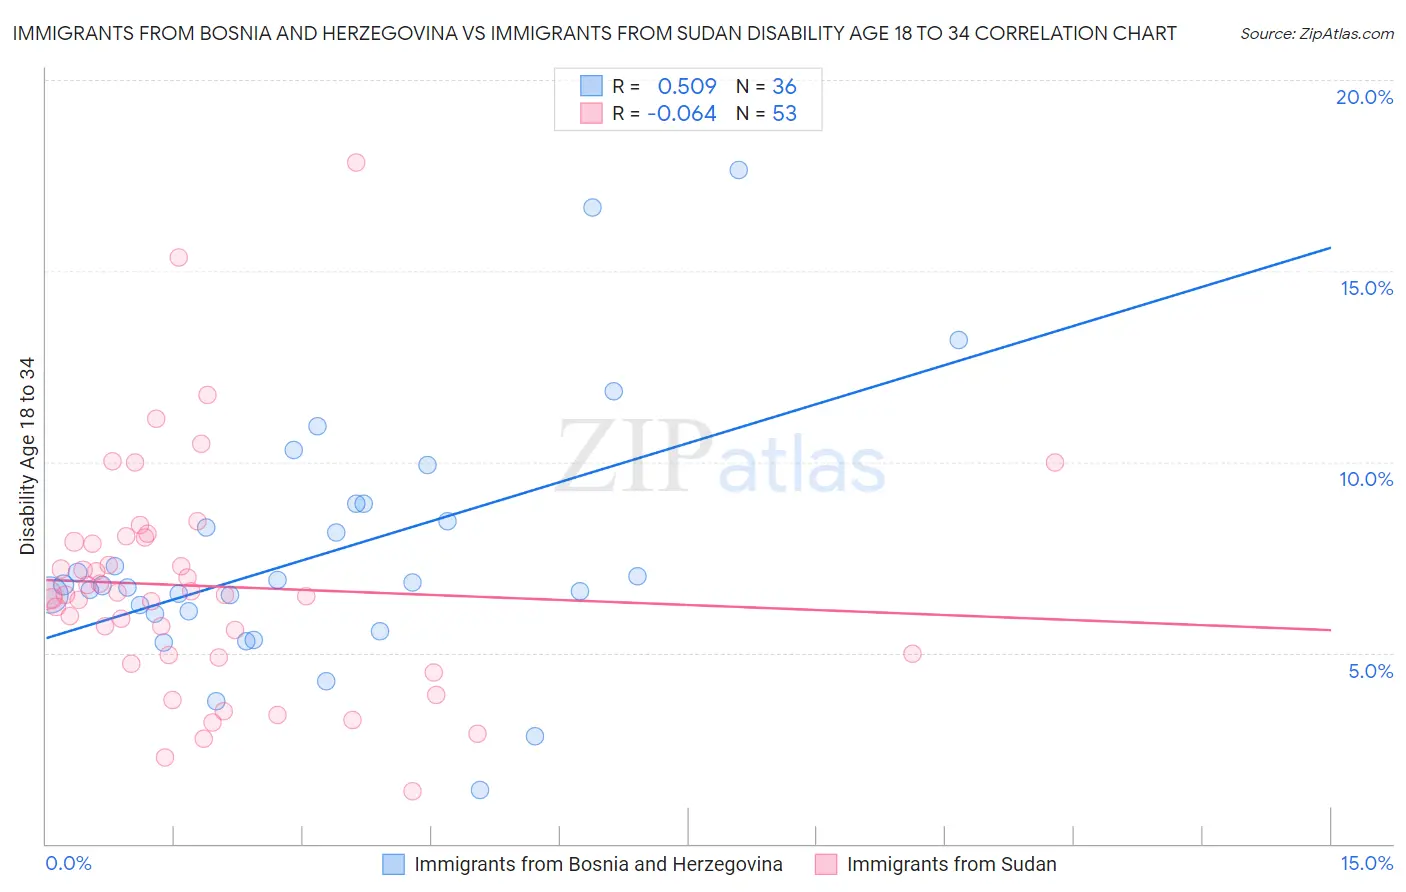 Immigrants from Bosnia and Herzegovina vs Immigrants from Sudan Disability Age 18 to 34